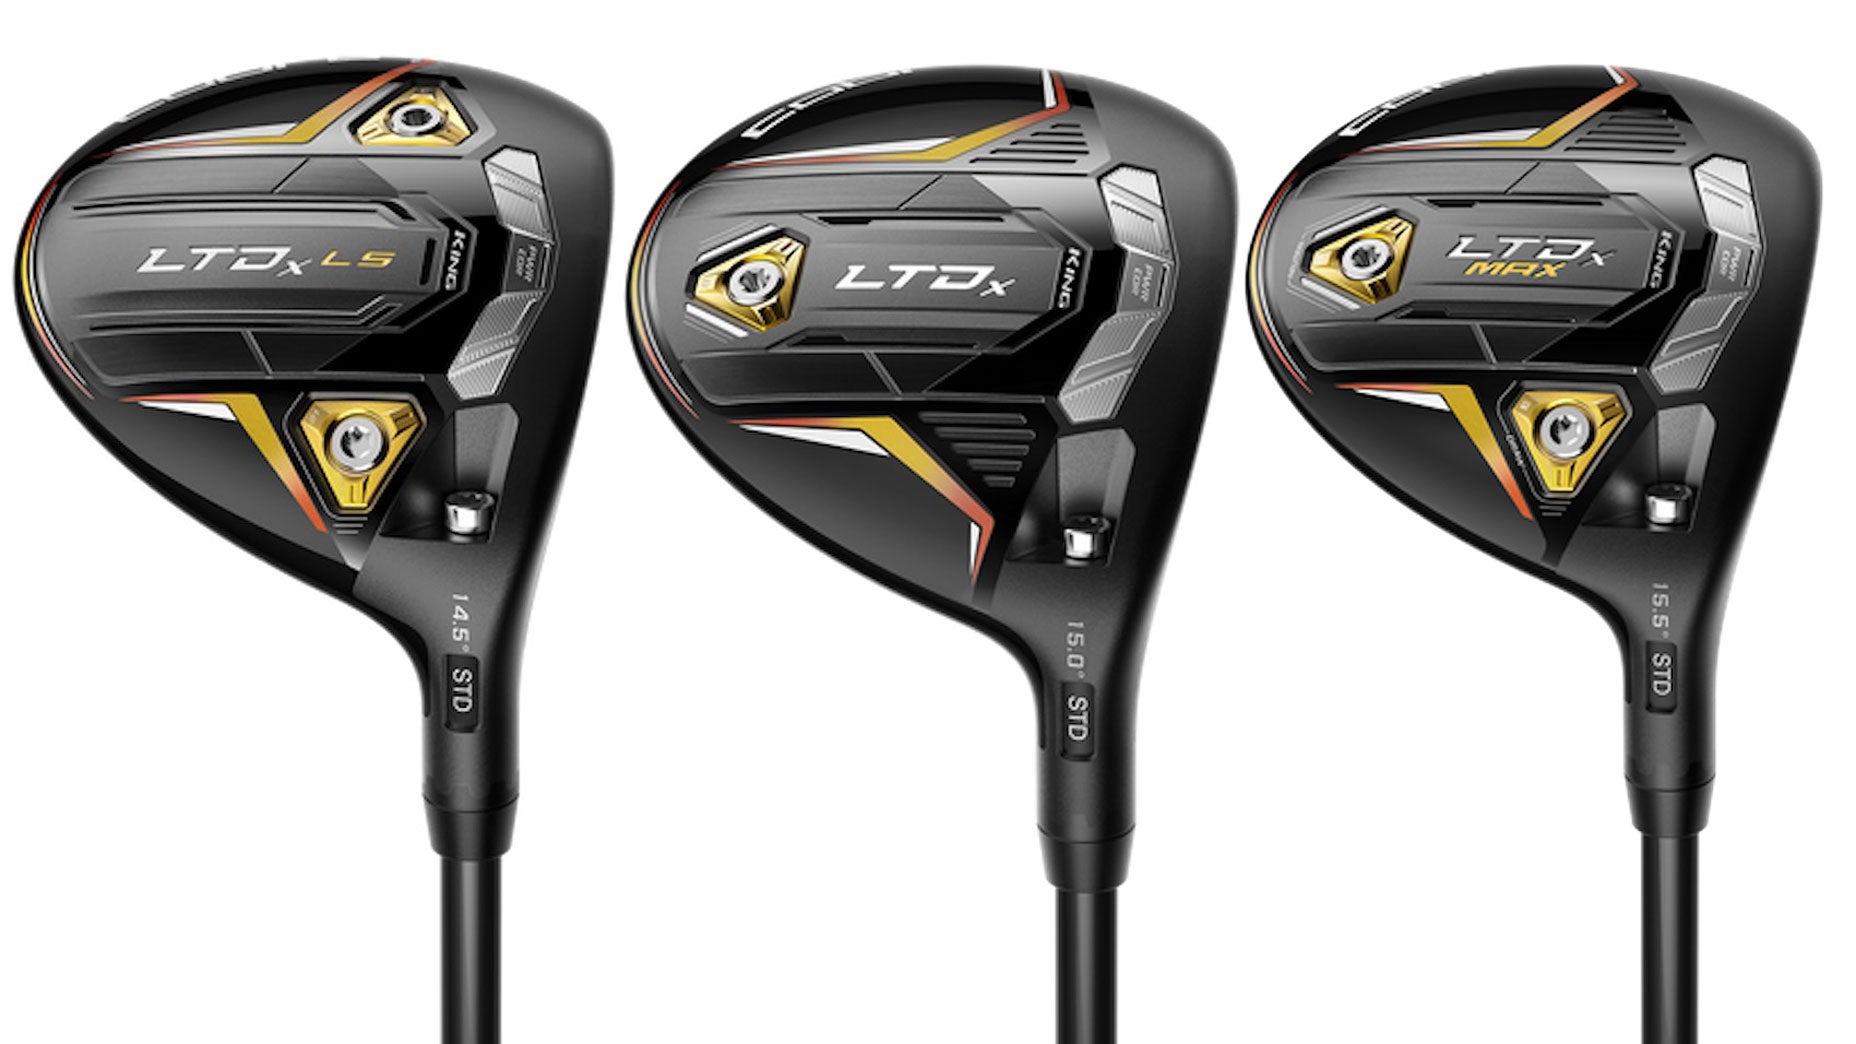 4 Cobra fairway woods tested and reviewed   ClubTest